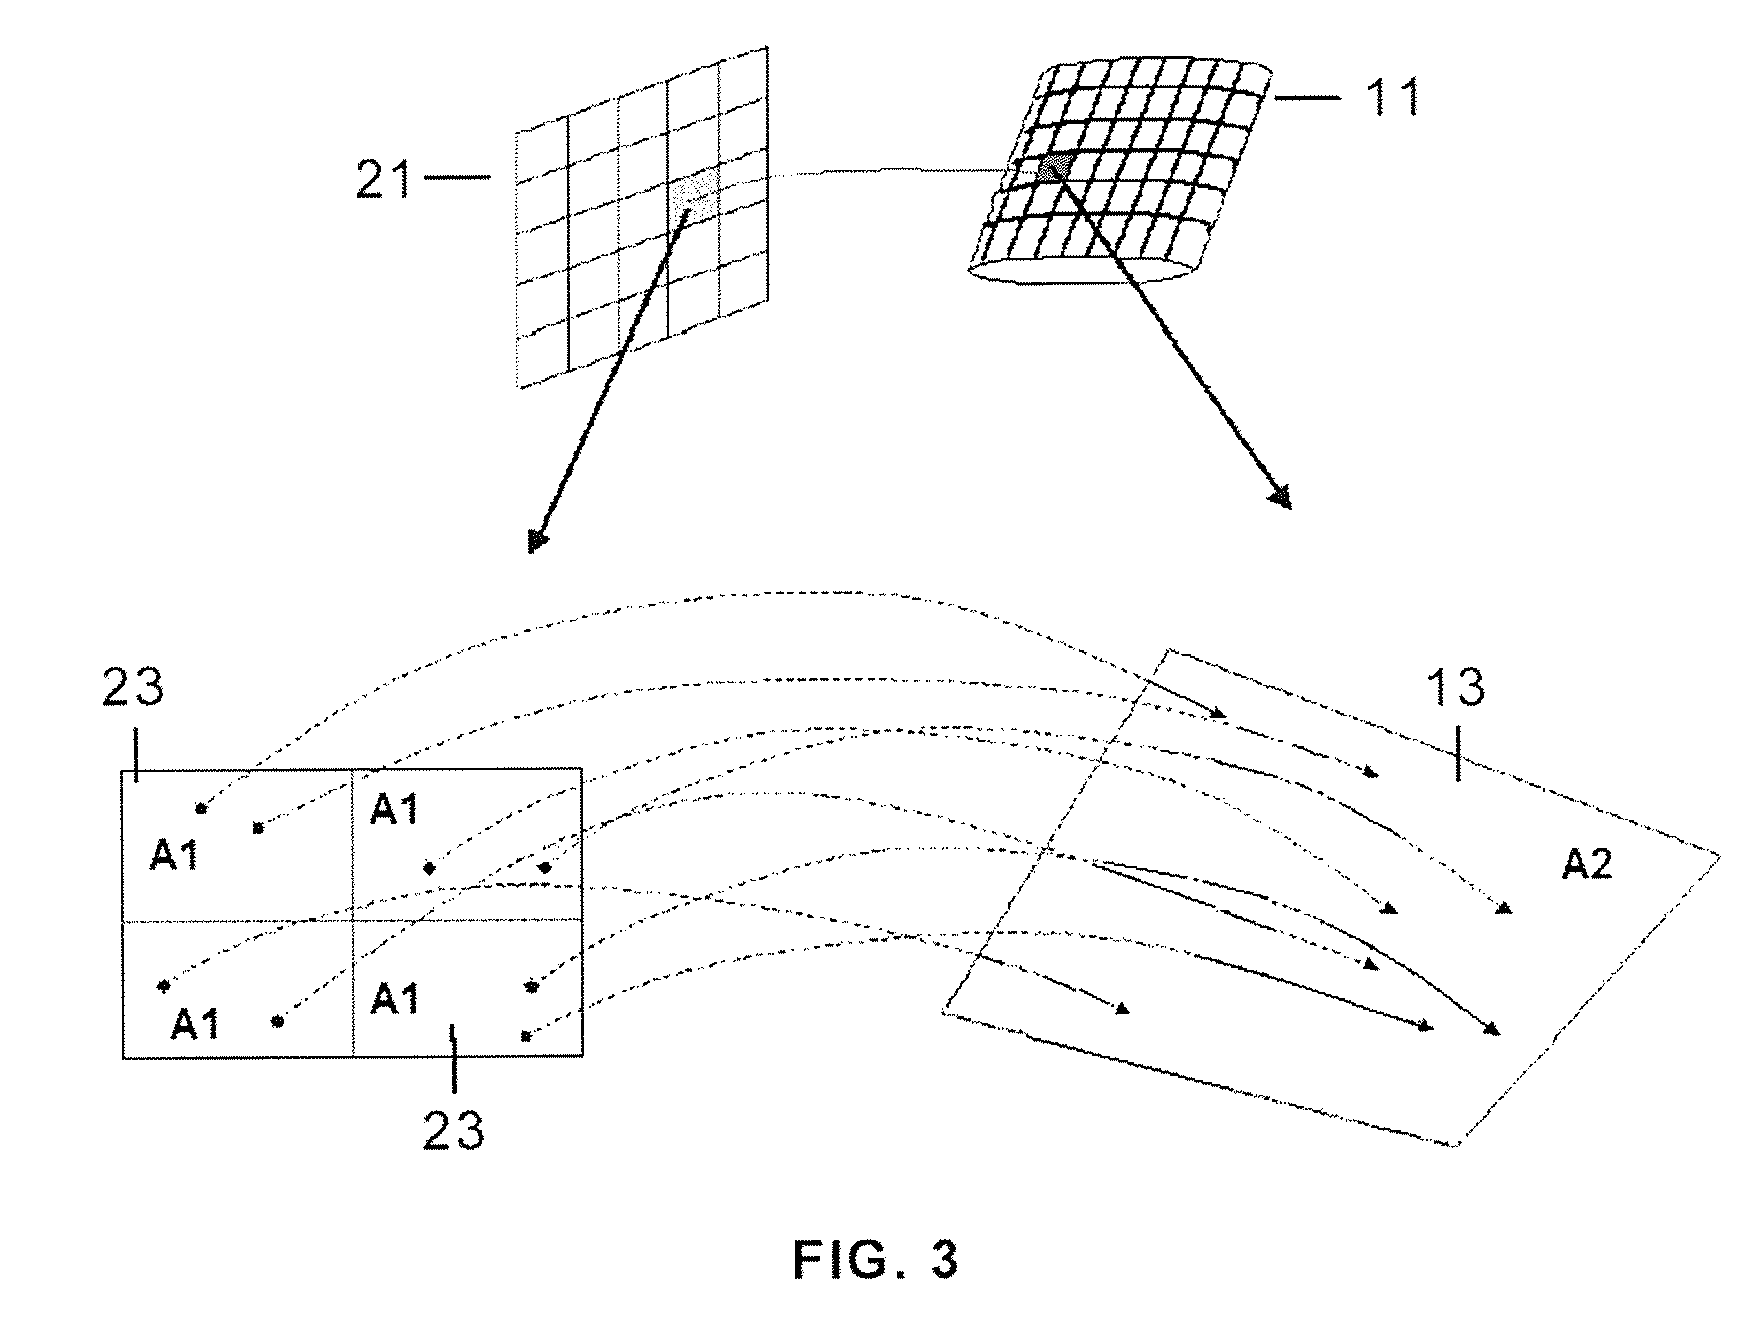 Computer-aided method for predicting particle uptake by a surface of a moving object